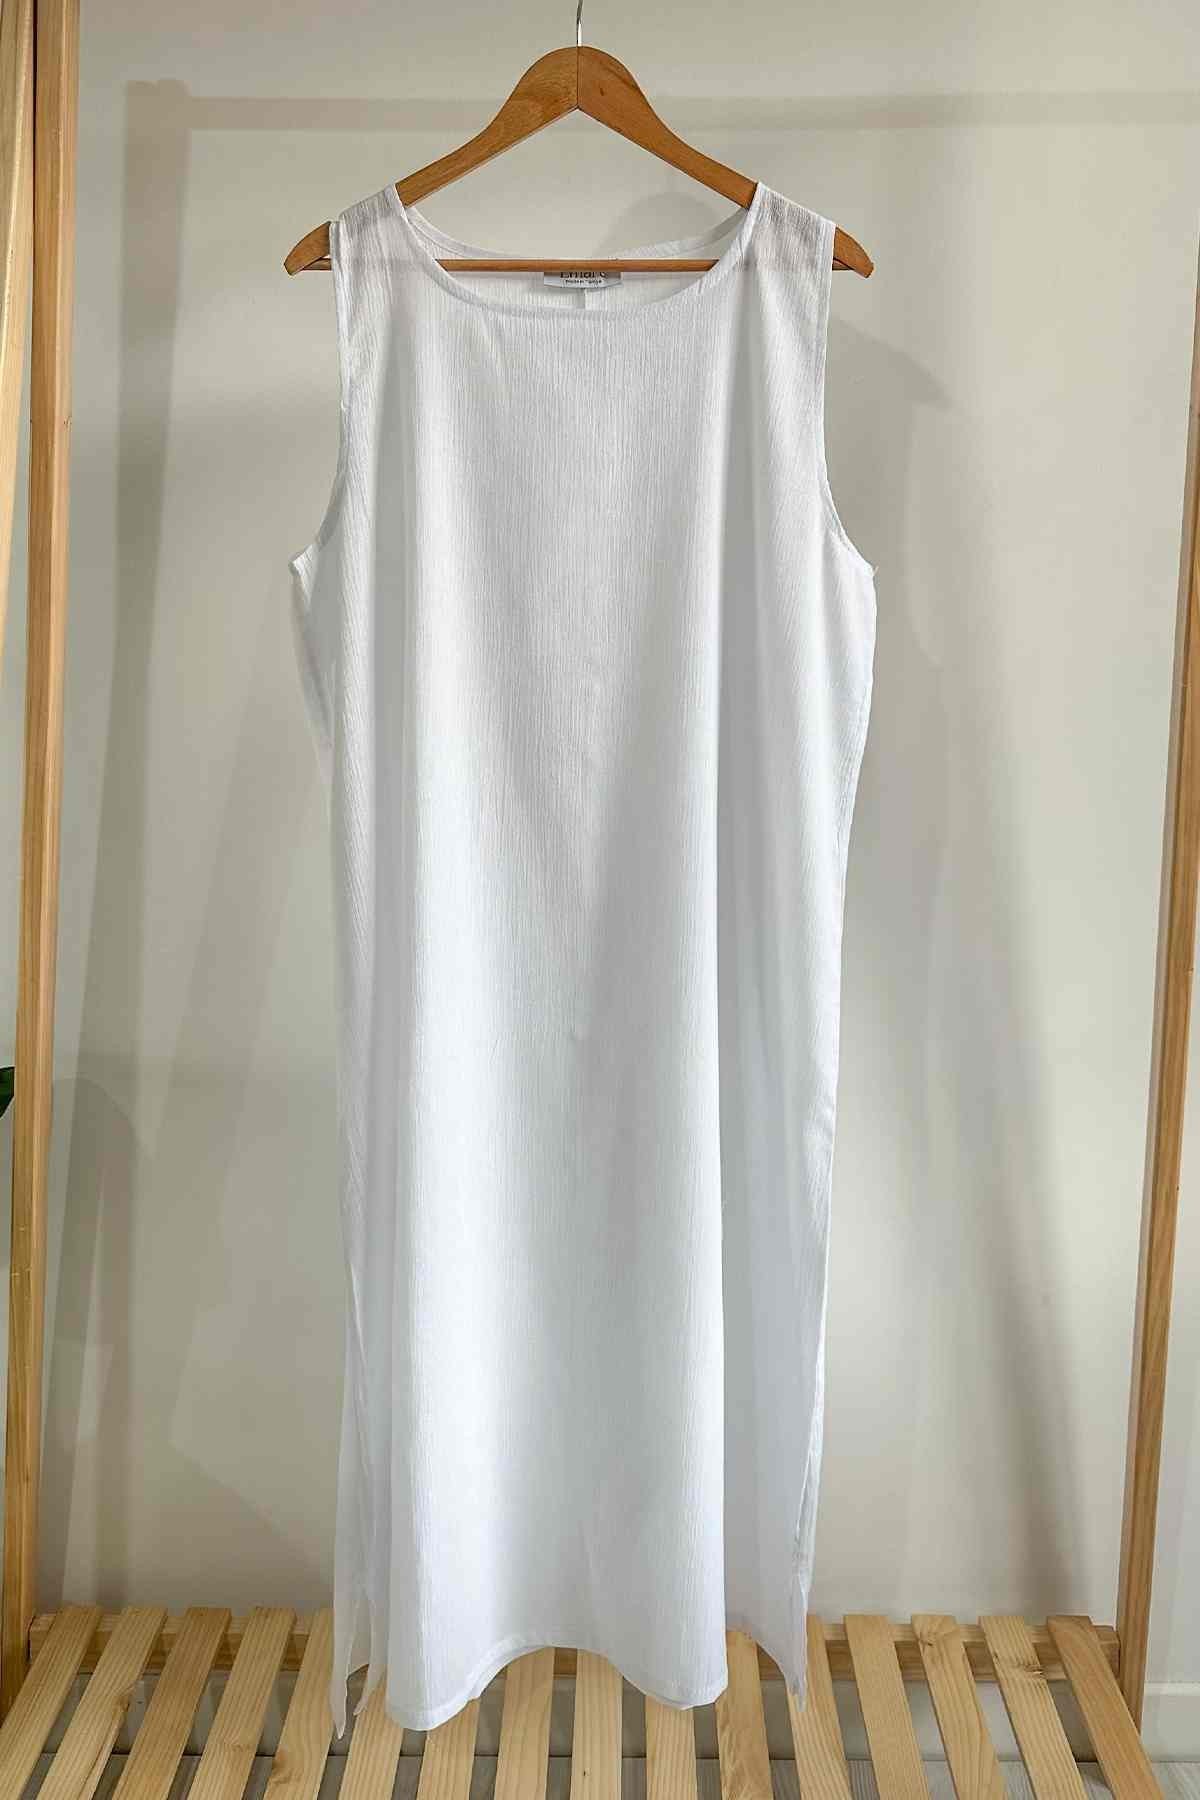 Sile Cloth Lining - White